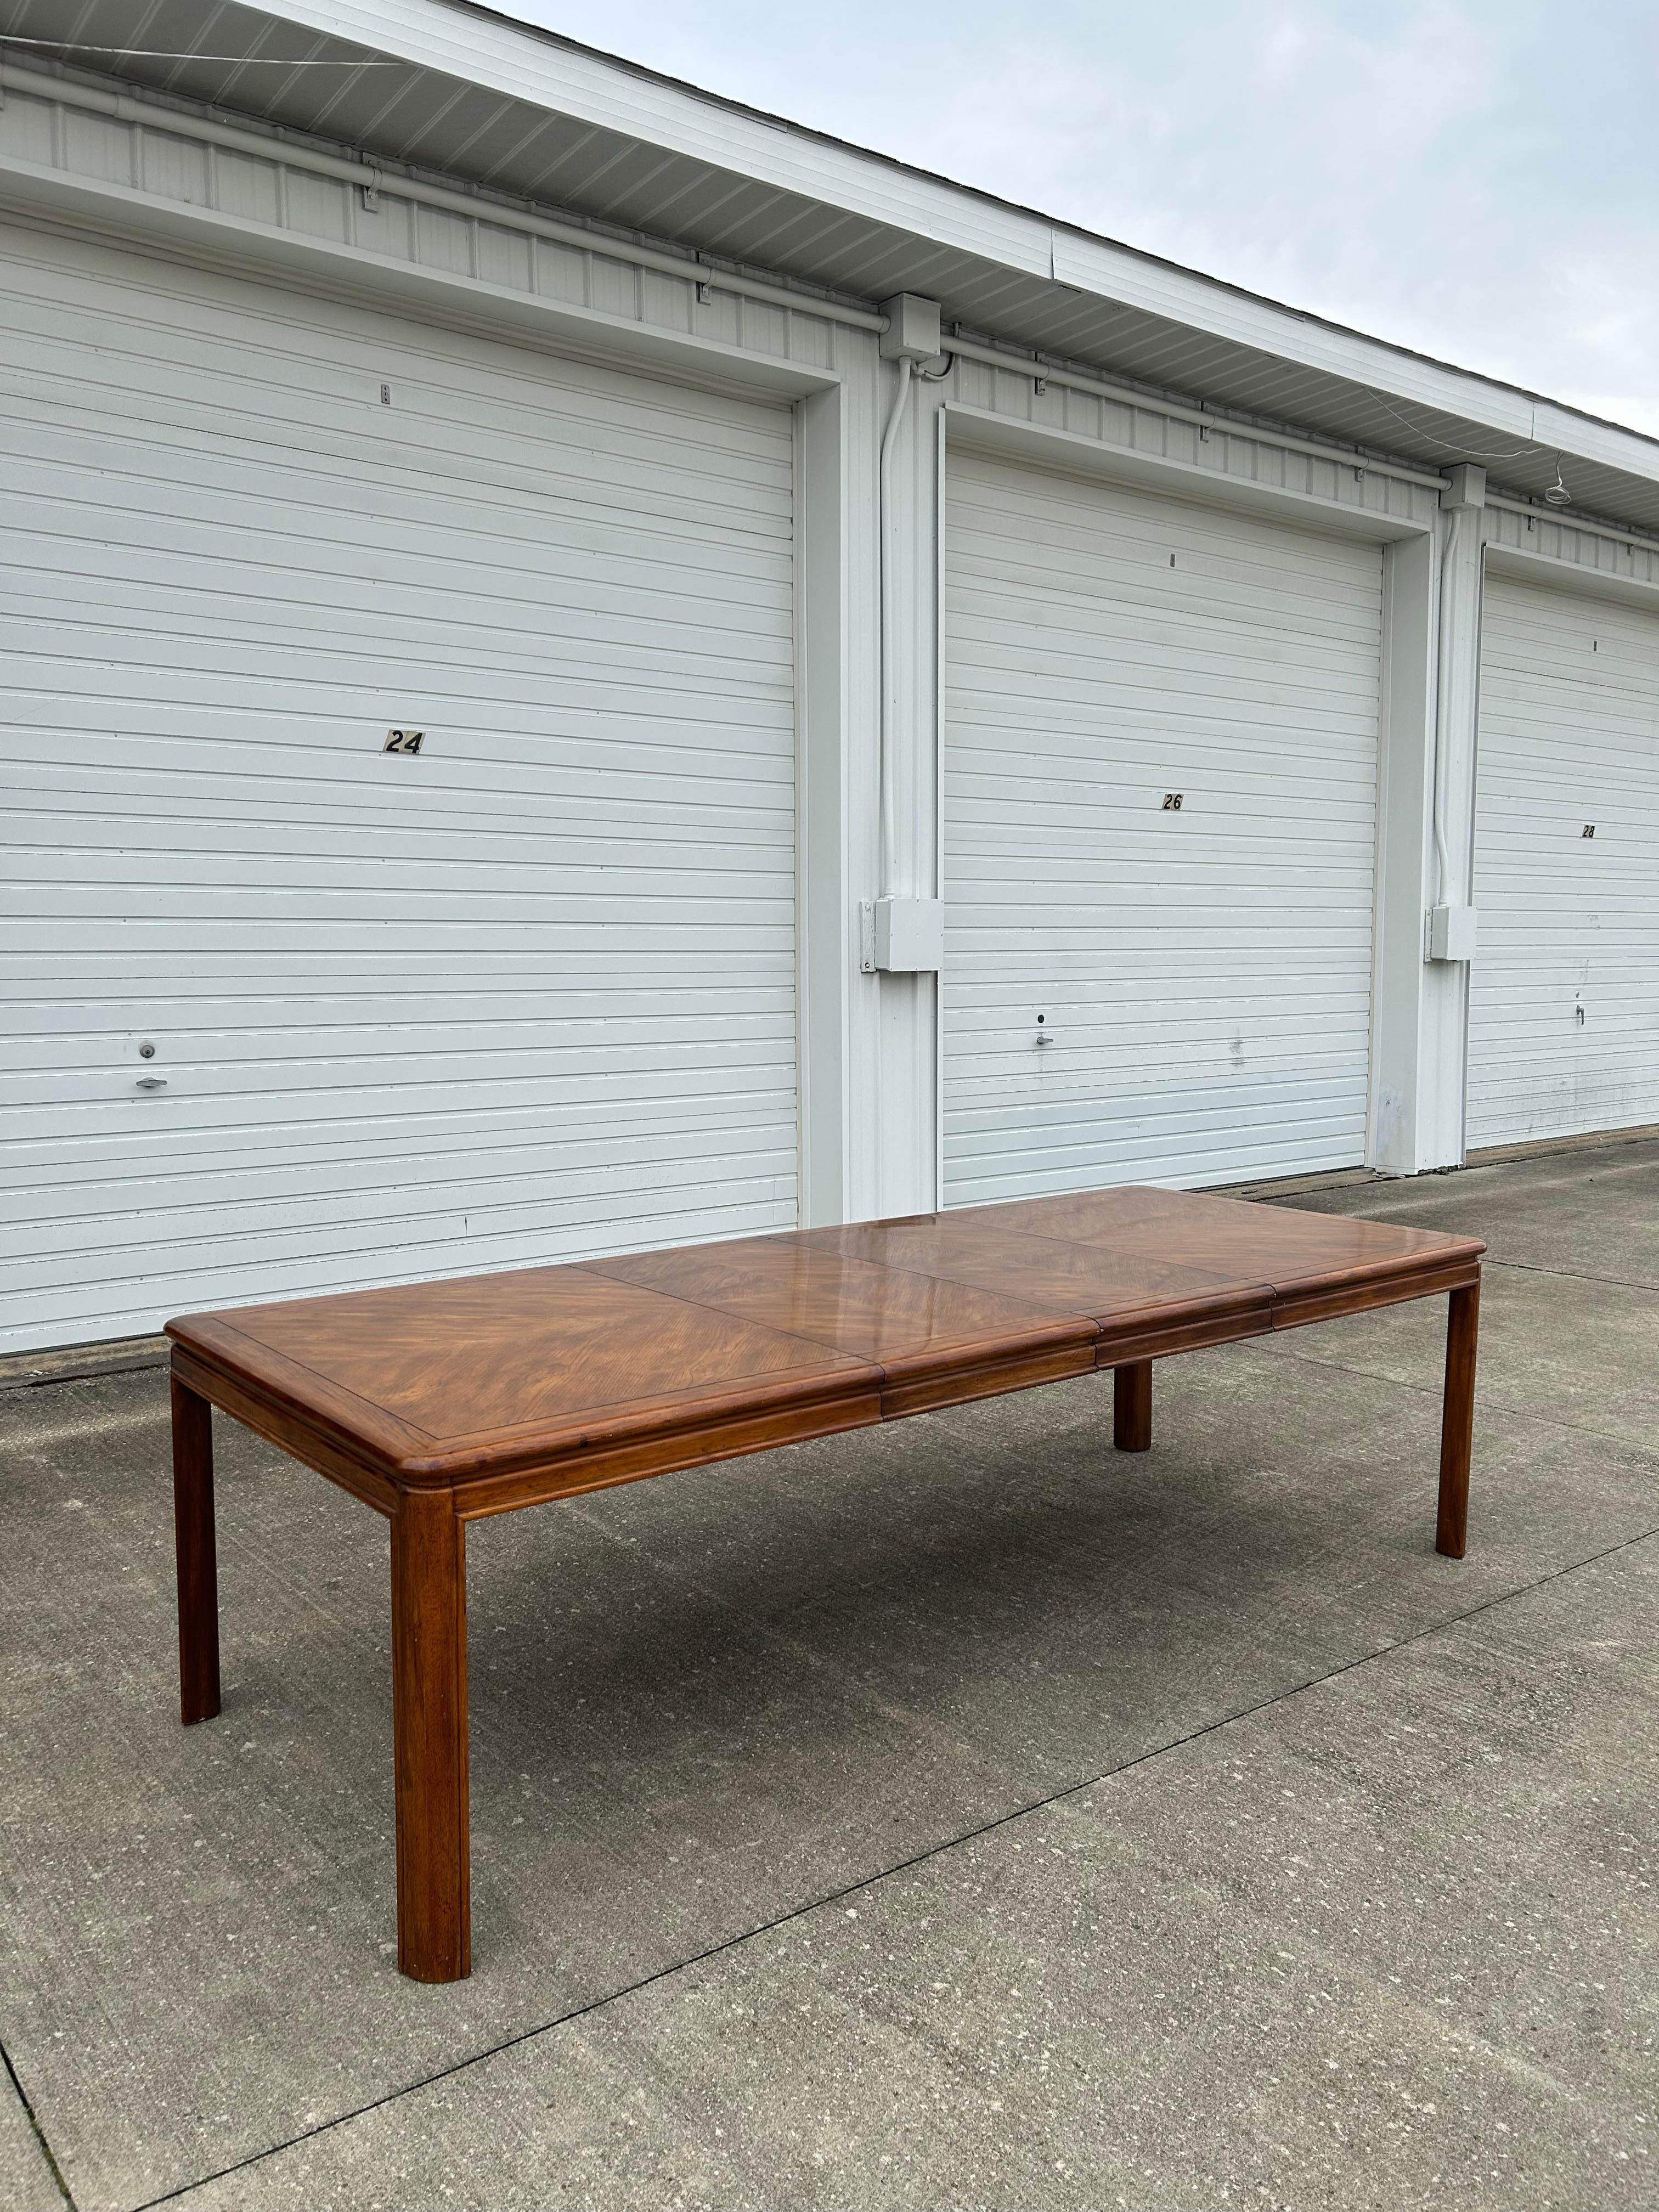 Very large Drexel Passage Postmodern Dining Table w/ 2 Leaves!! It does have some light scratches but it doesn't have any structural damages. Great for large family's or gatherings!

Both leaves 104”w x 42d x 29h
64